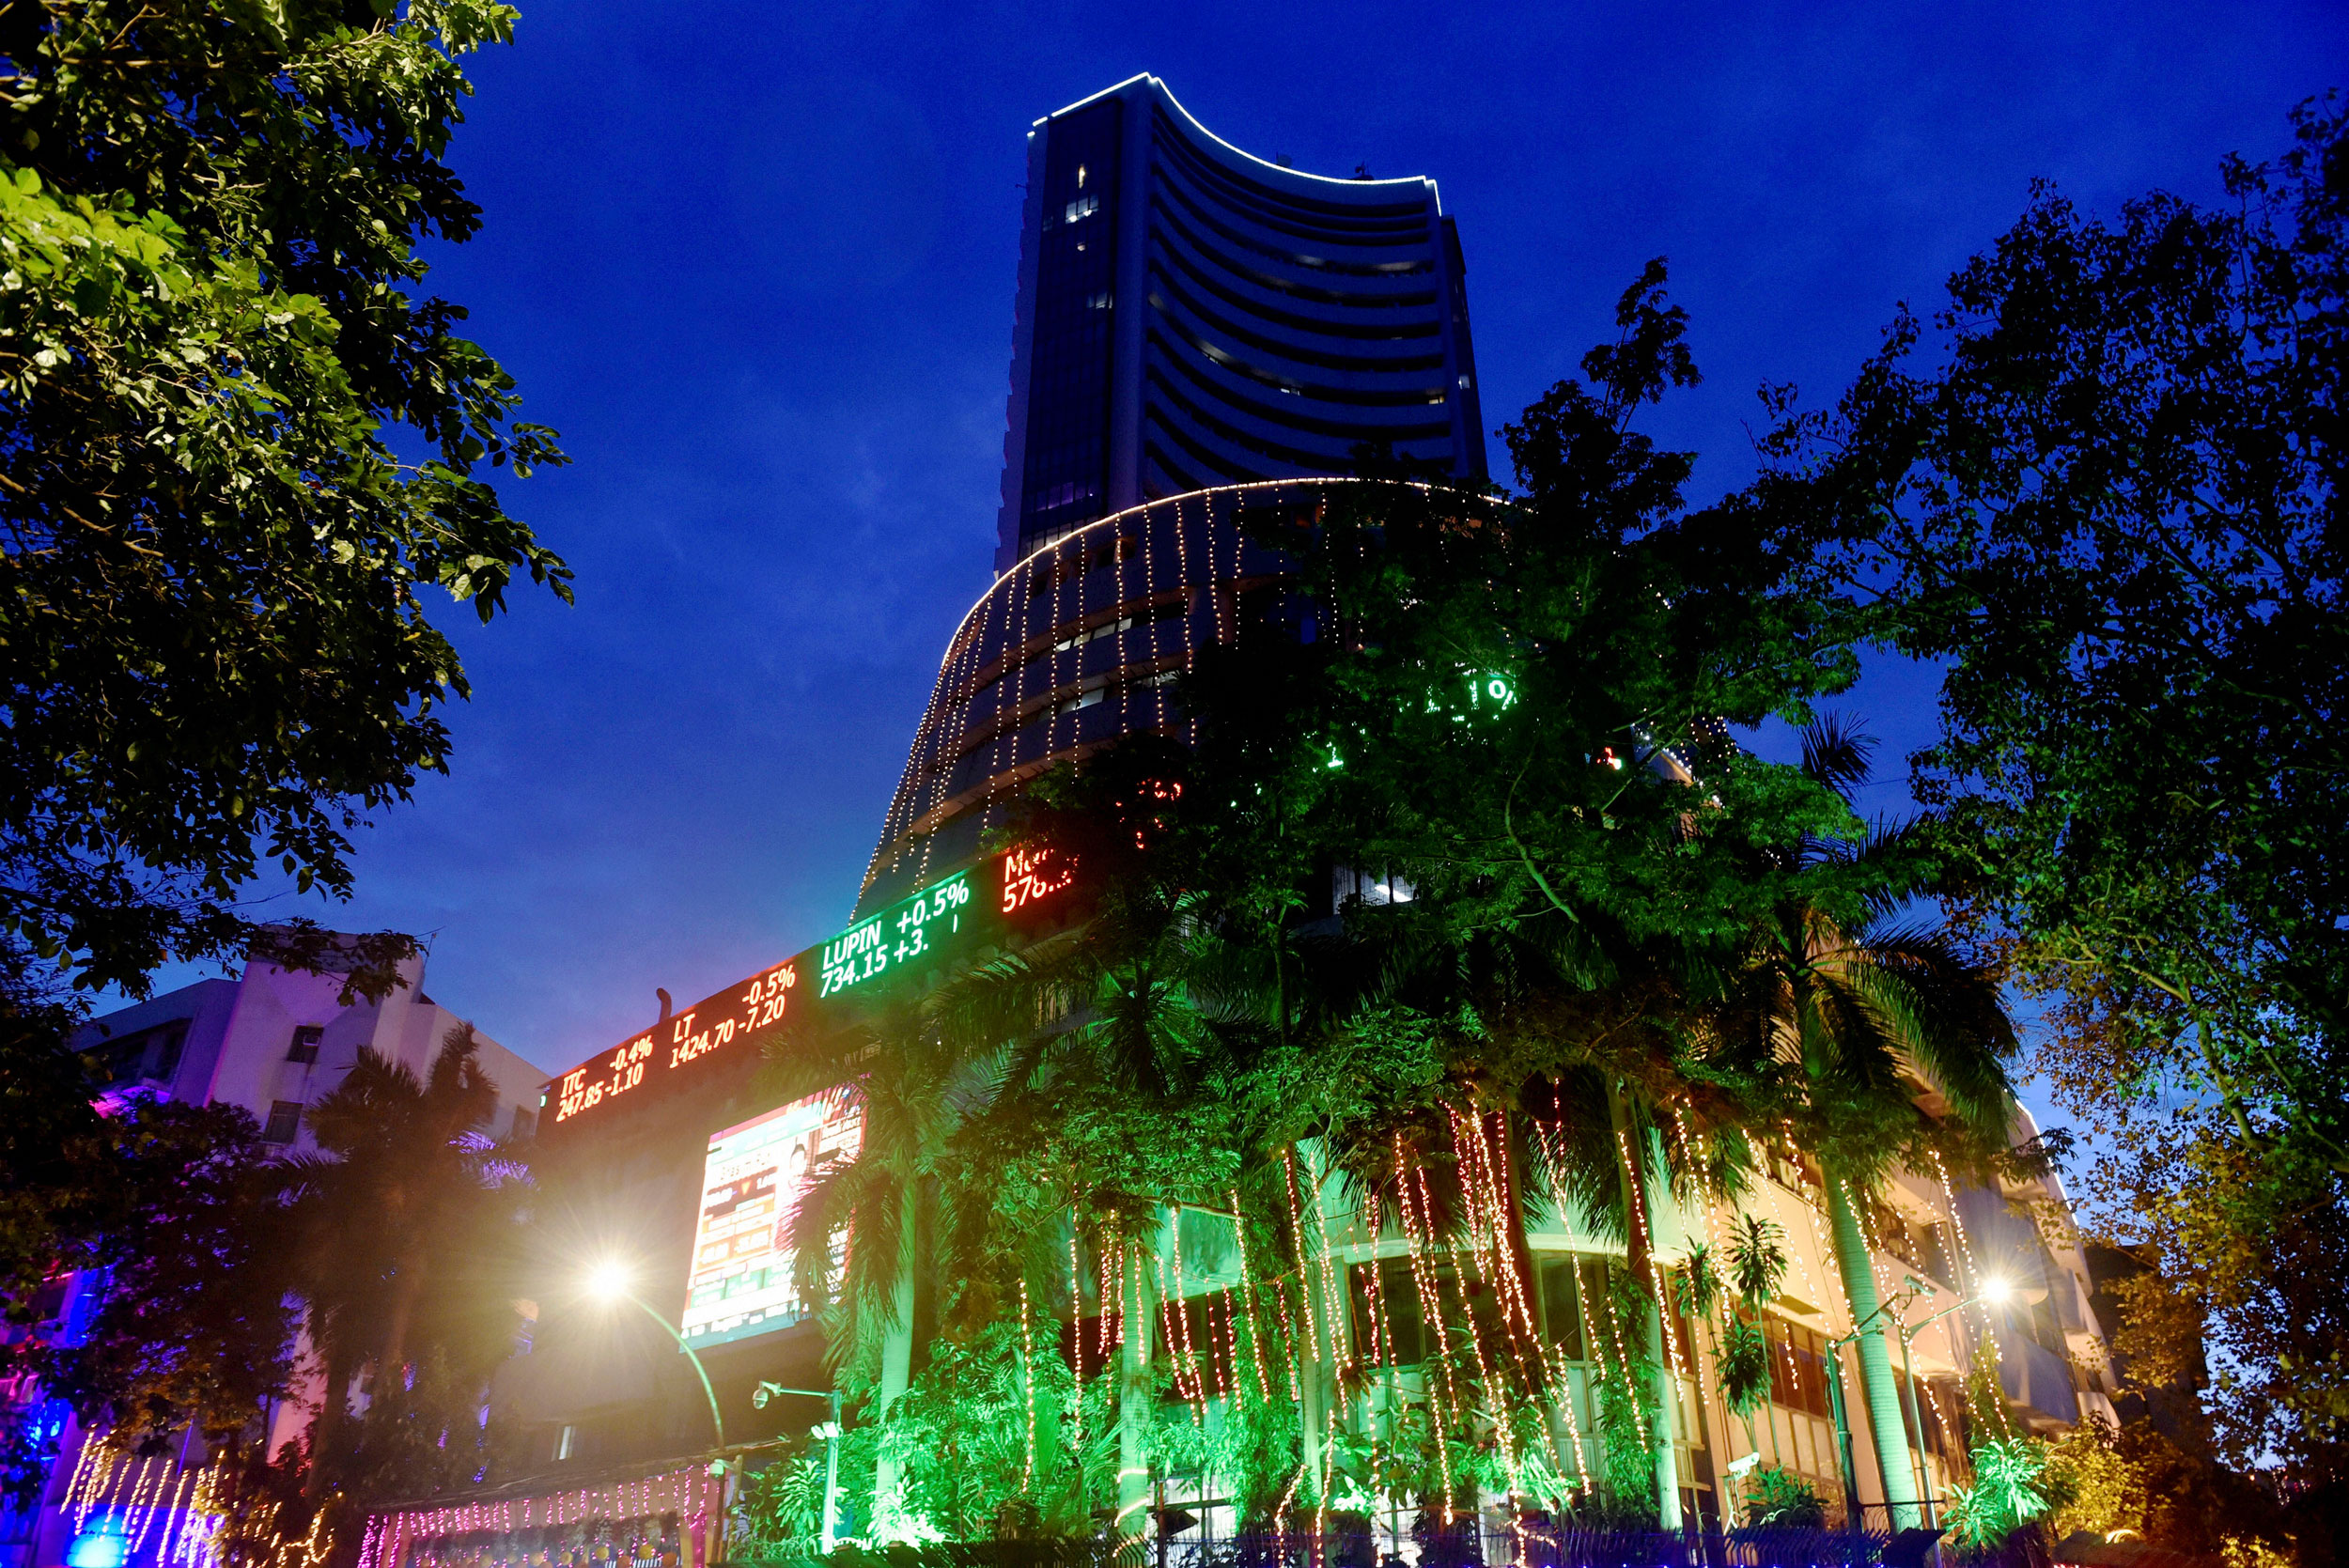 The BSE building during the Diwali muhurat trading session in Mumbai on Sunday.